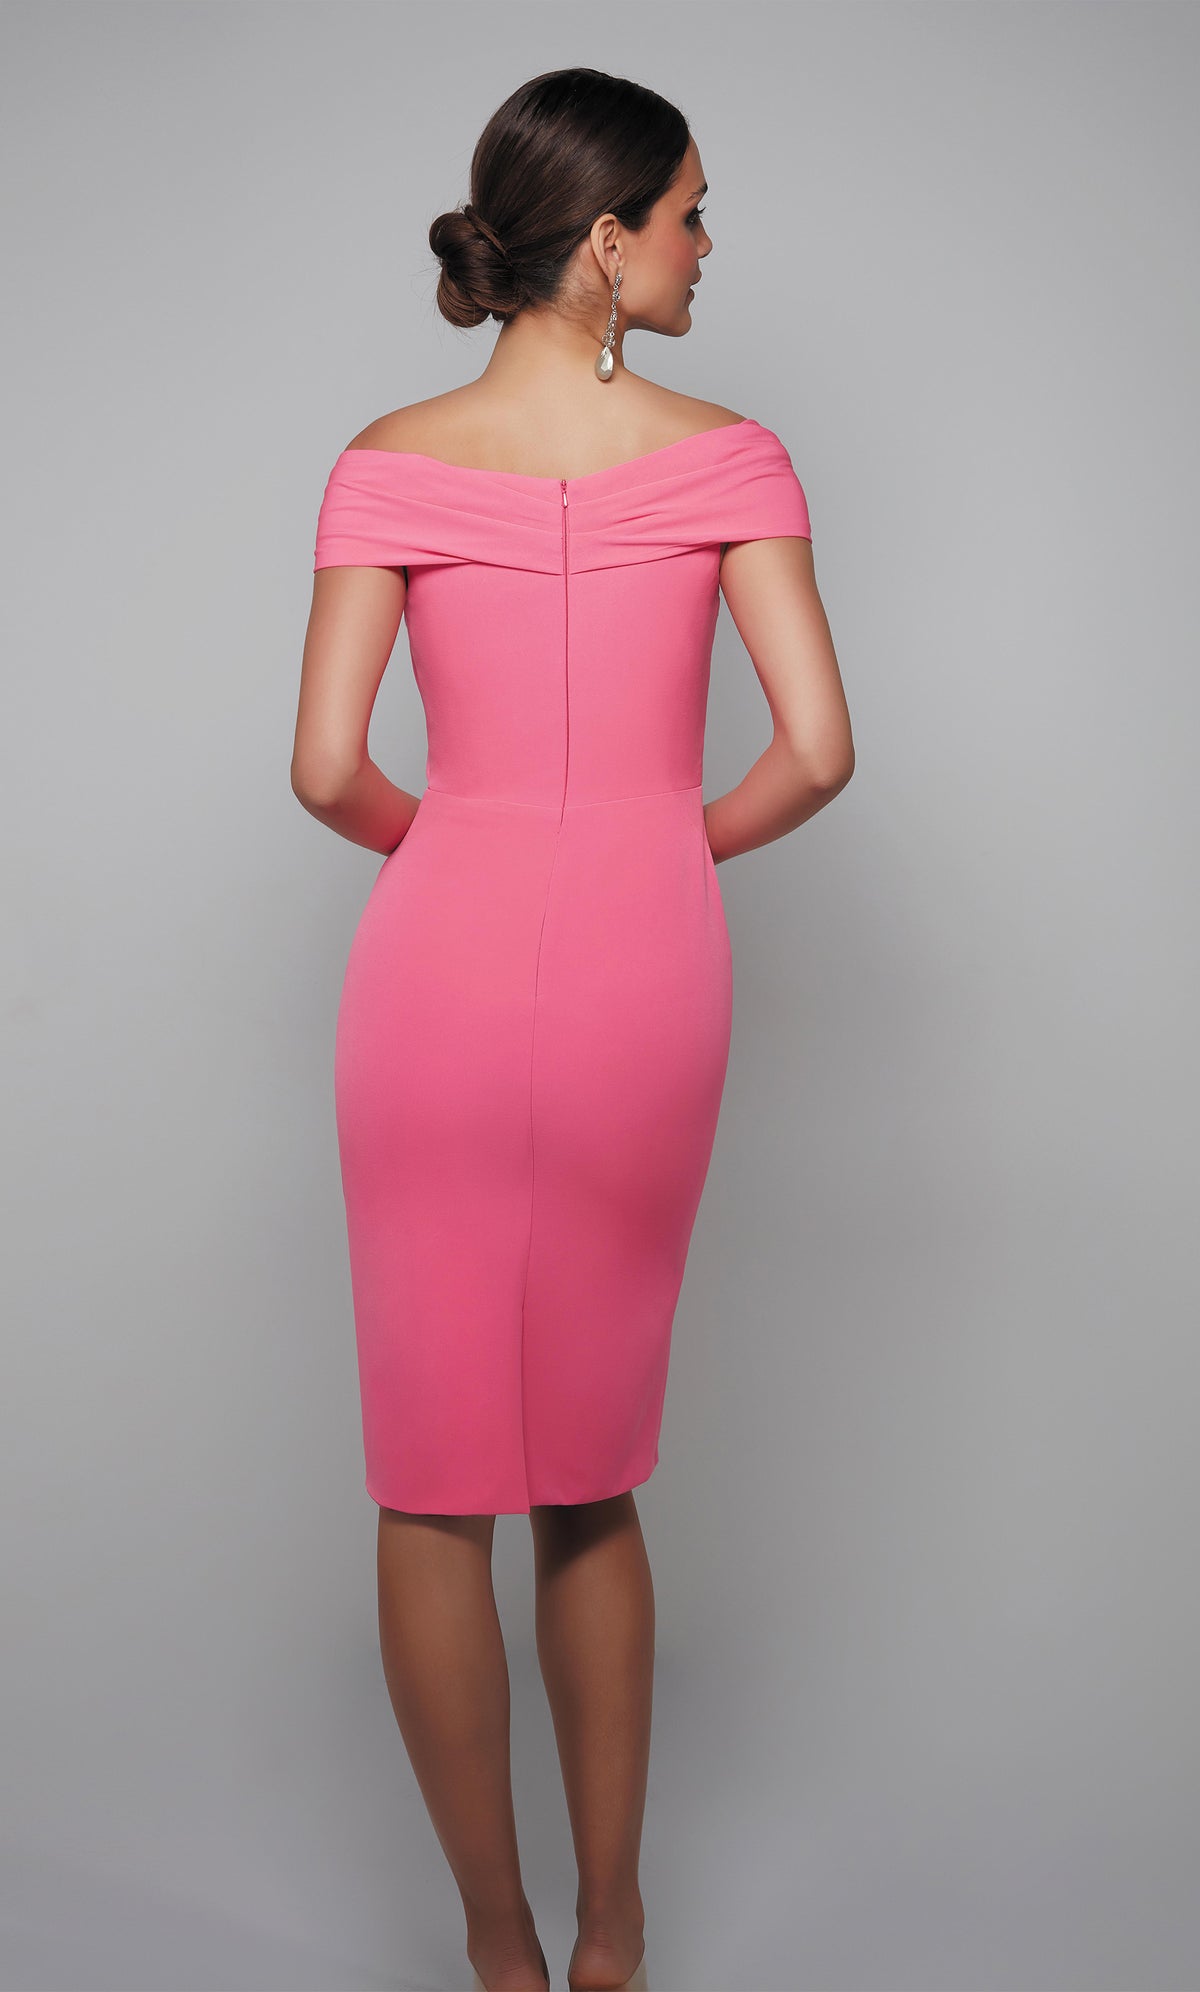 Hot pink off the shoulder bodycon midi dress with a zip up back and back slit.